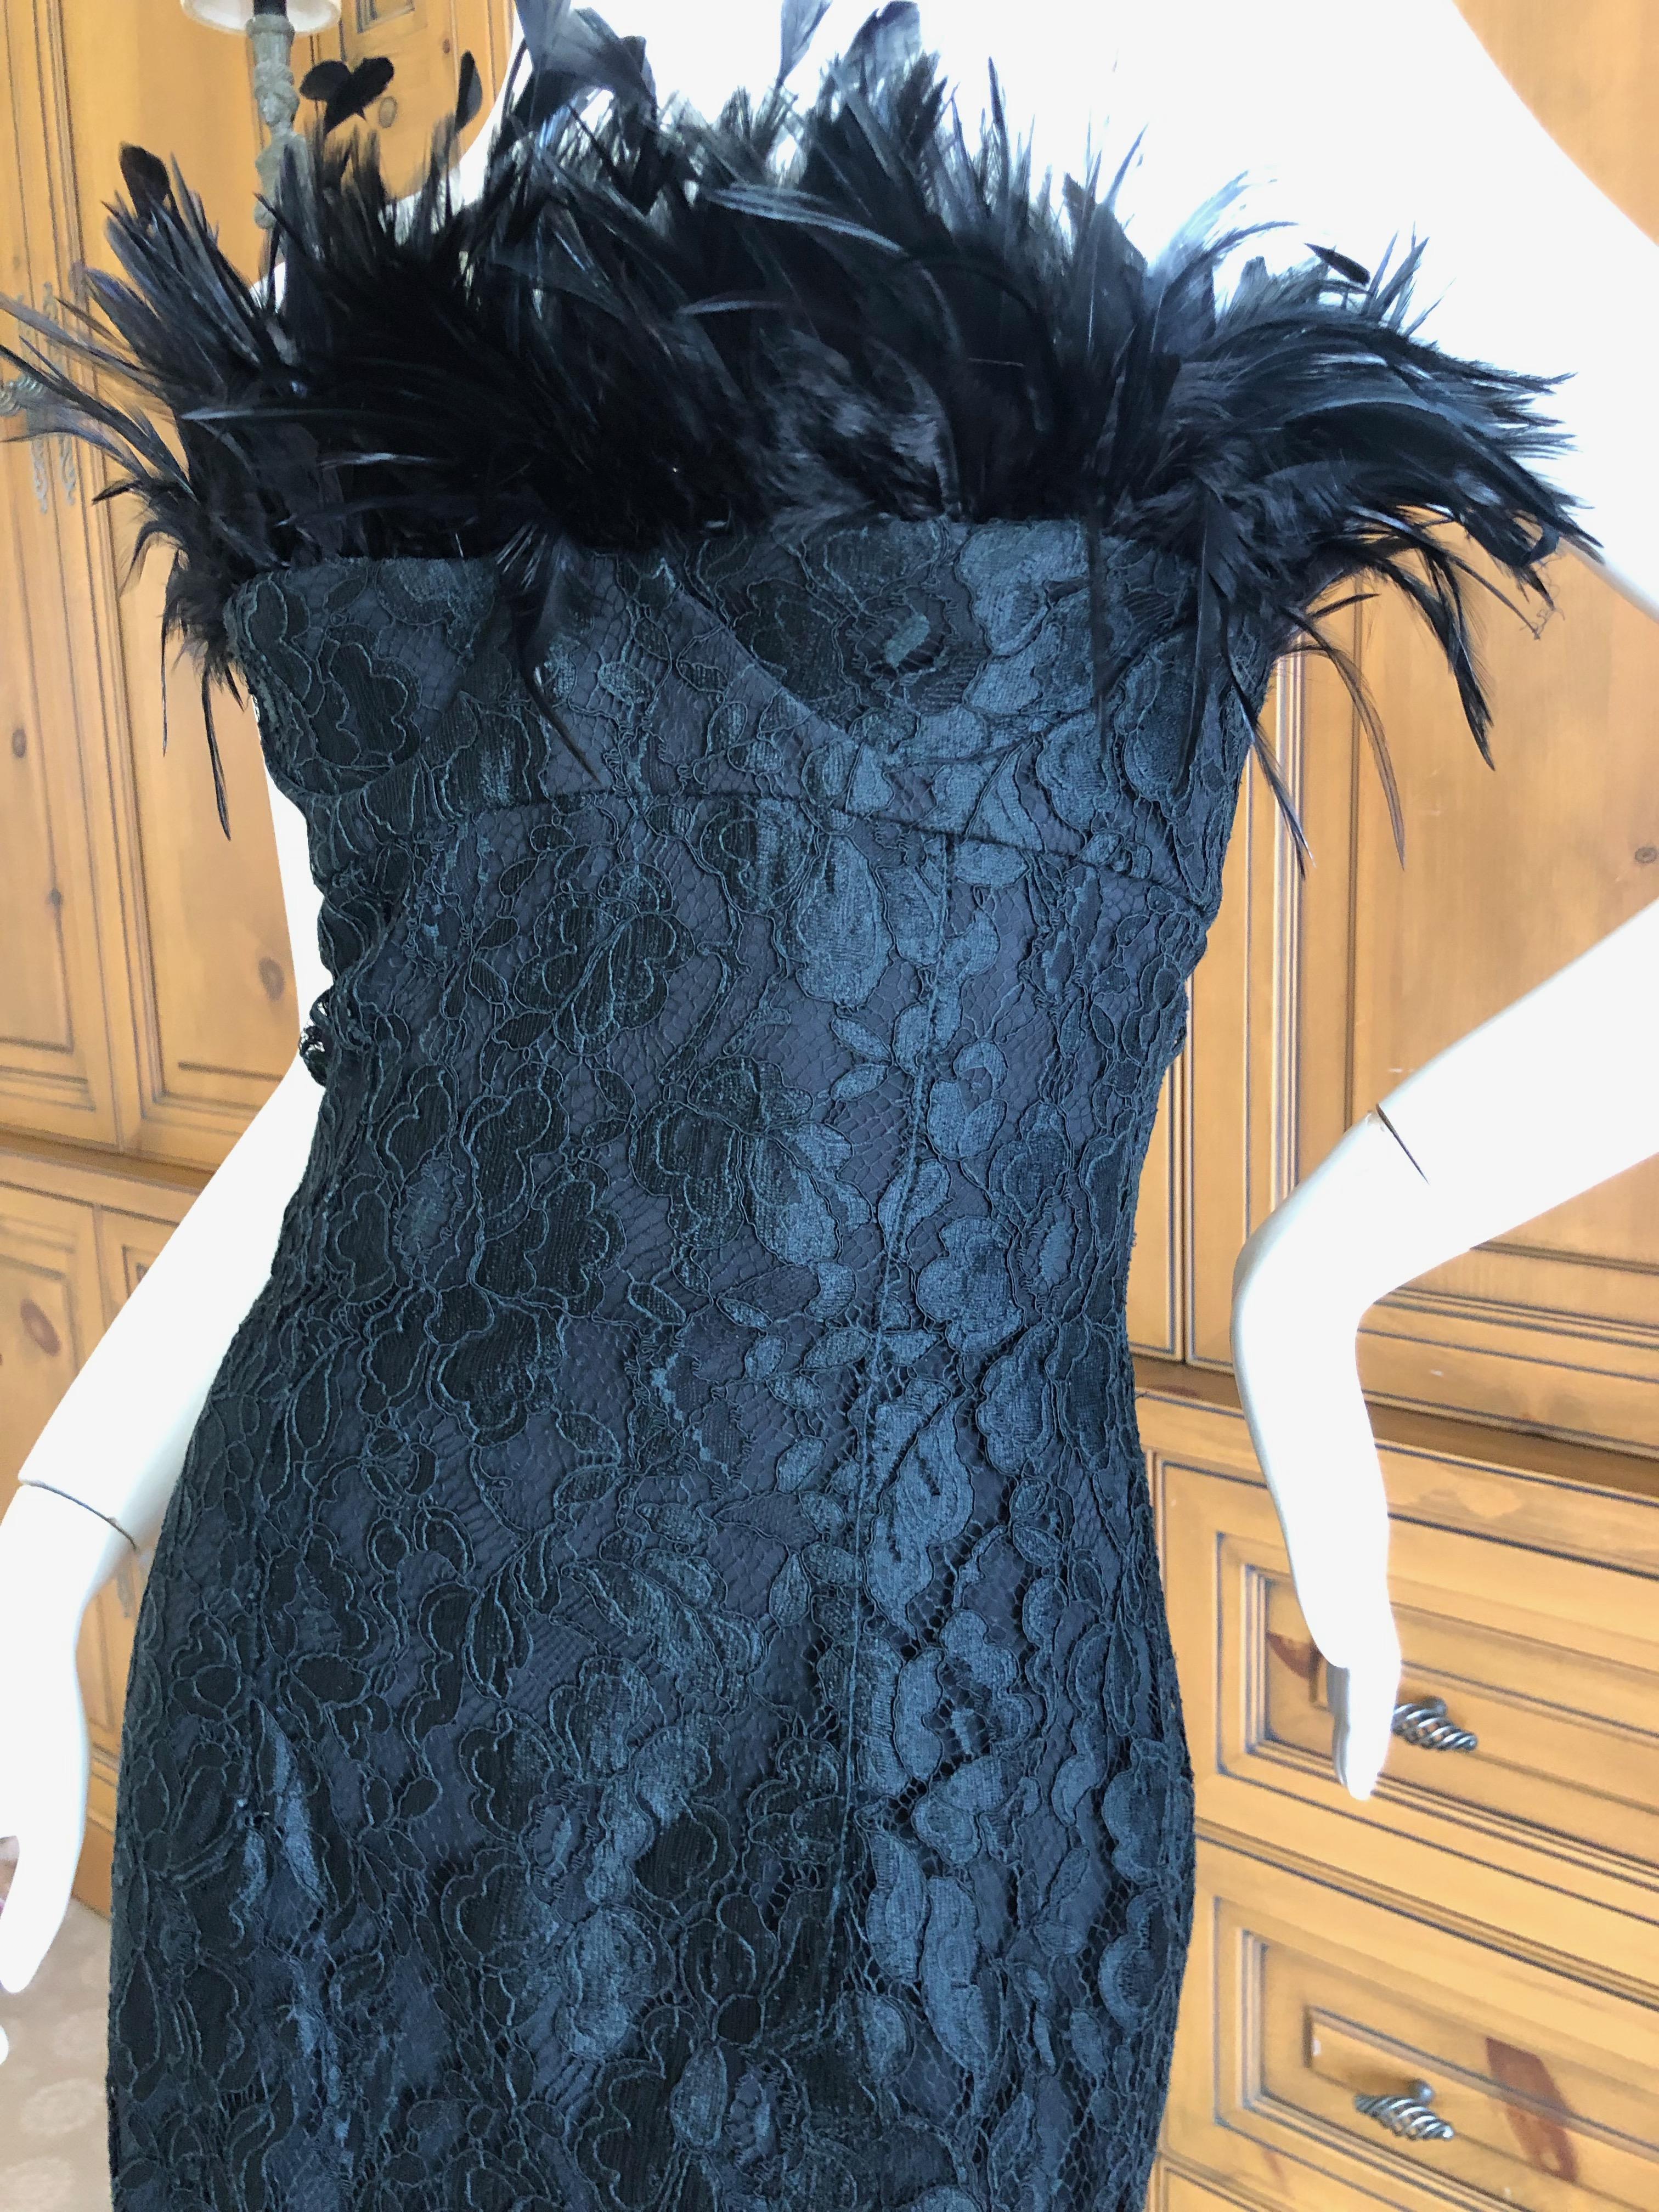 Yves Saint Laurent Rive Gauche Black Lace Strapless Mini Dress with Feather Bust In Excellent Condition For Sale In Cloverdale, CA